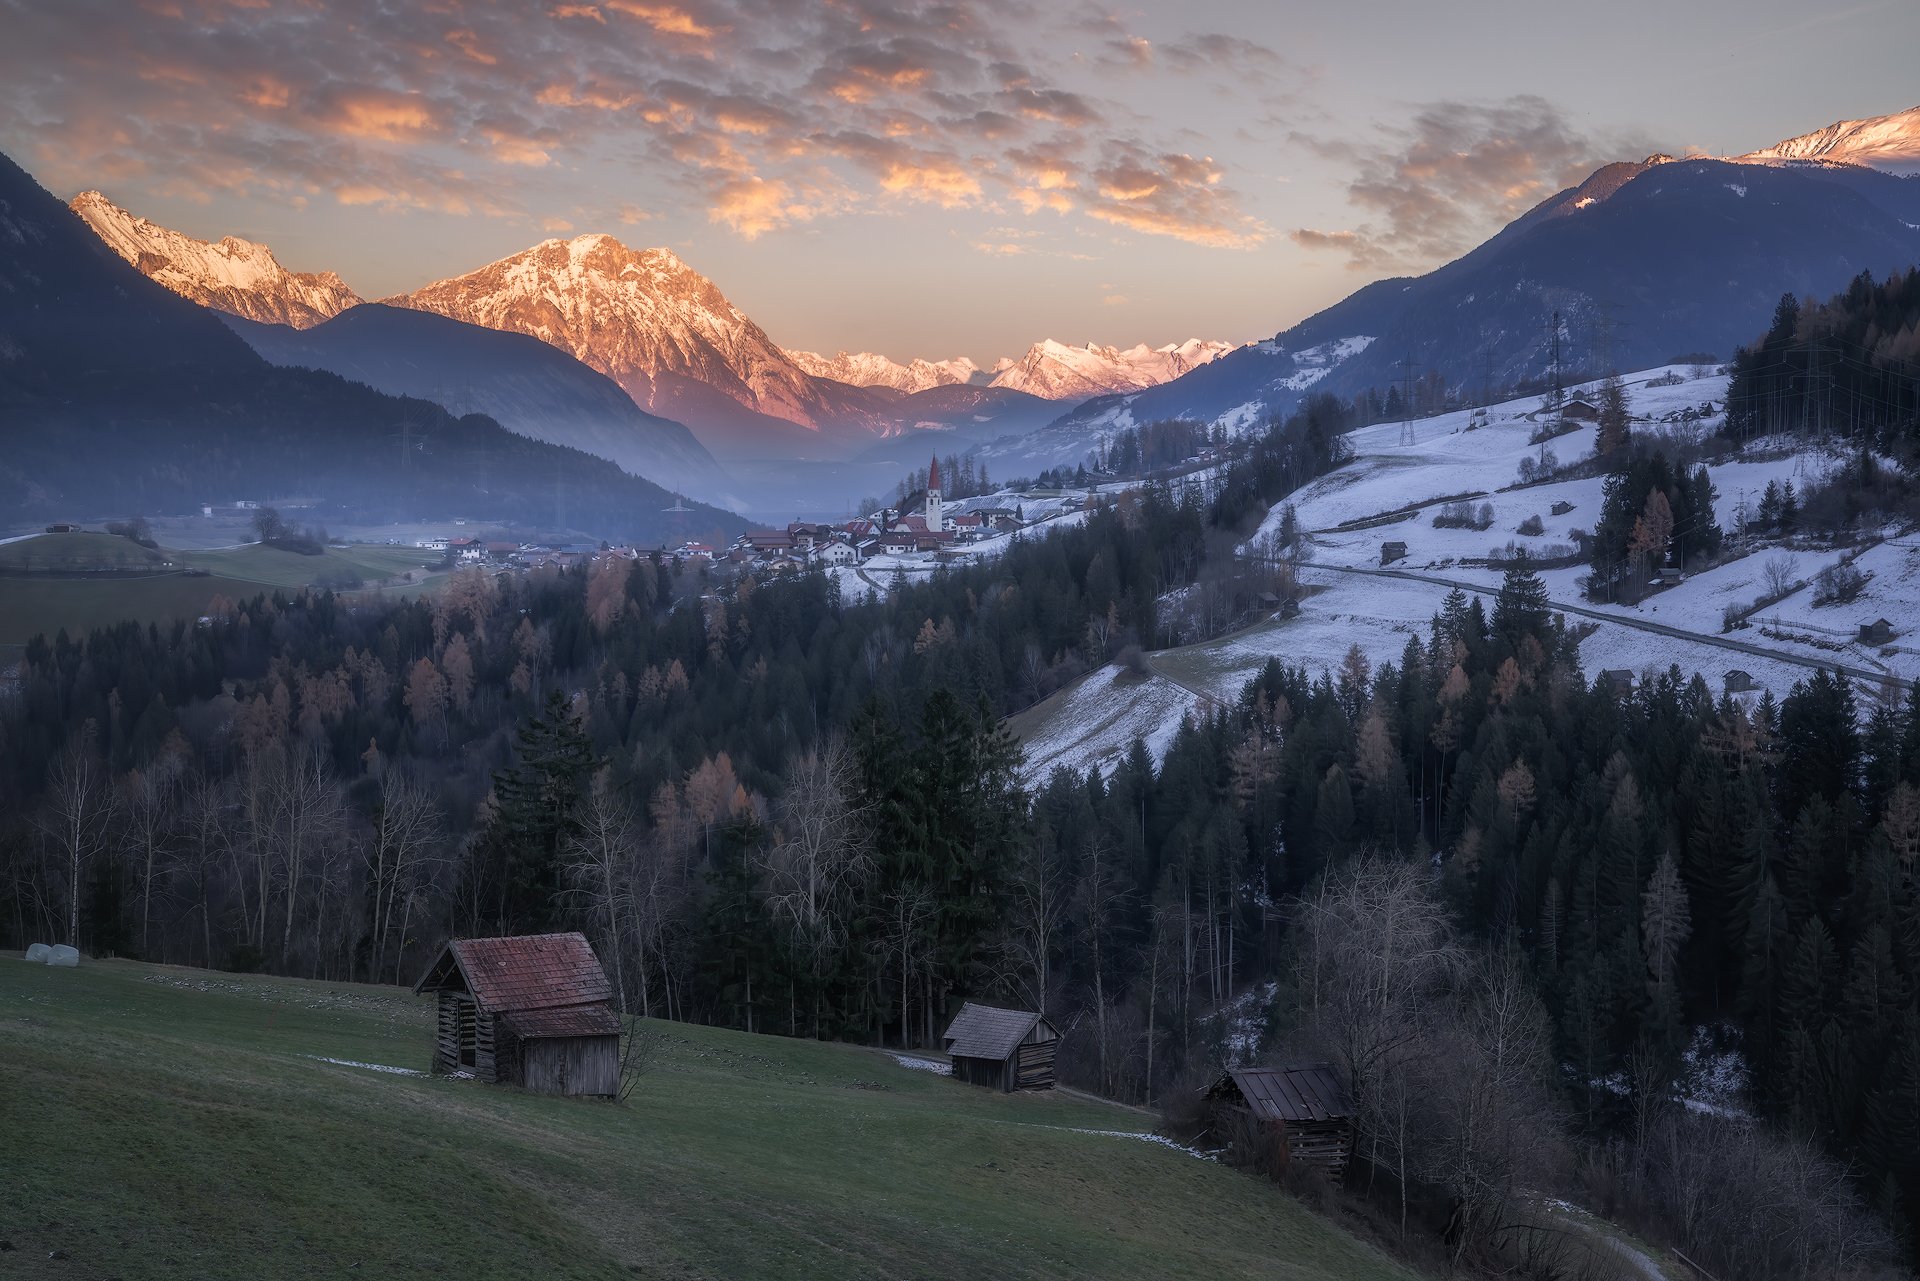 Acres, Afterglow, Agriculture, agricuturalbuilding, alps, Arzl, Austria, austrian alps, Barns, church, Clouds, Evening, eveningglow, Farmhouse, fog, foggy, Forest, Frost, frosty, Heybarns, Hill, Hills, houses, Hovel, Huts, Landscape, Logcabin, Meadows, Mo, Ludwig Riml